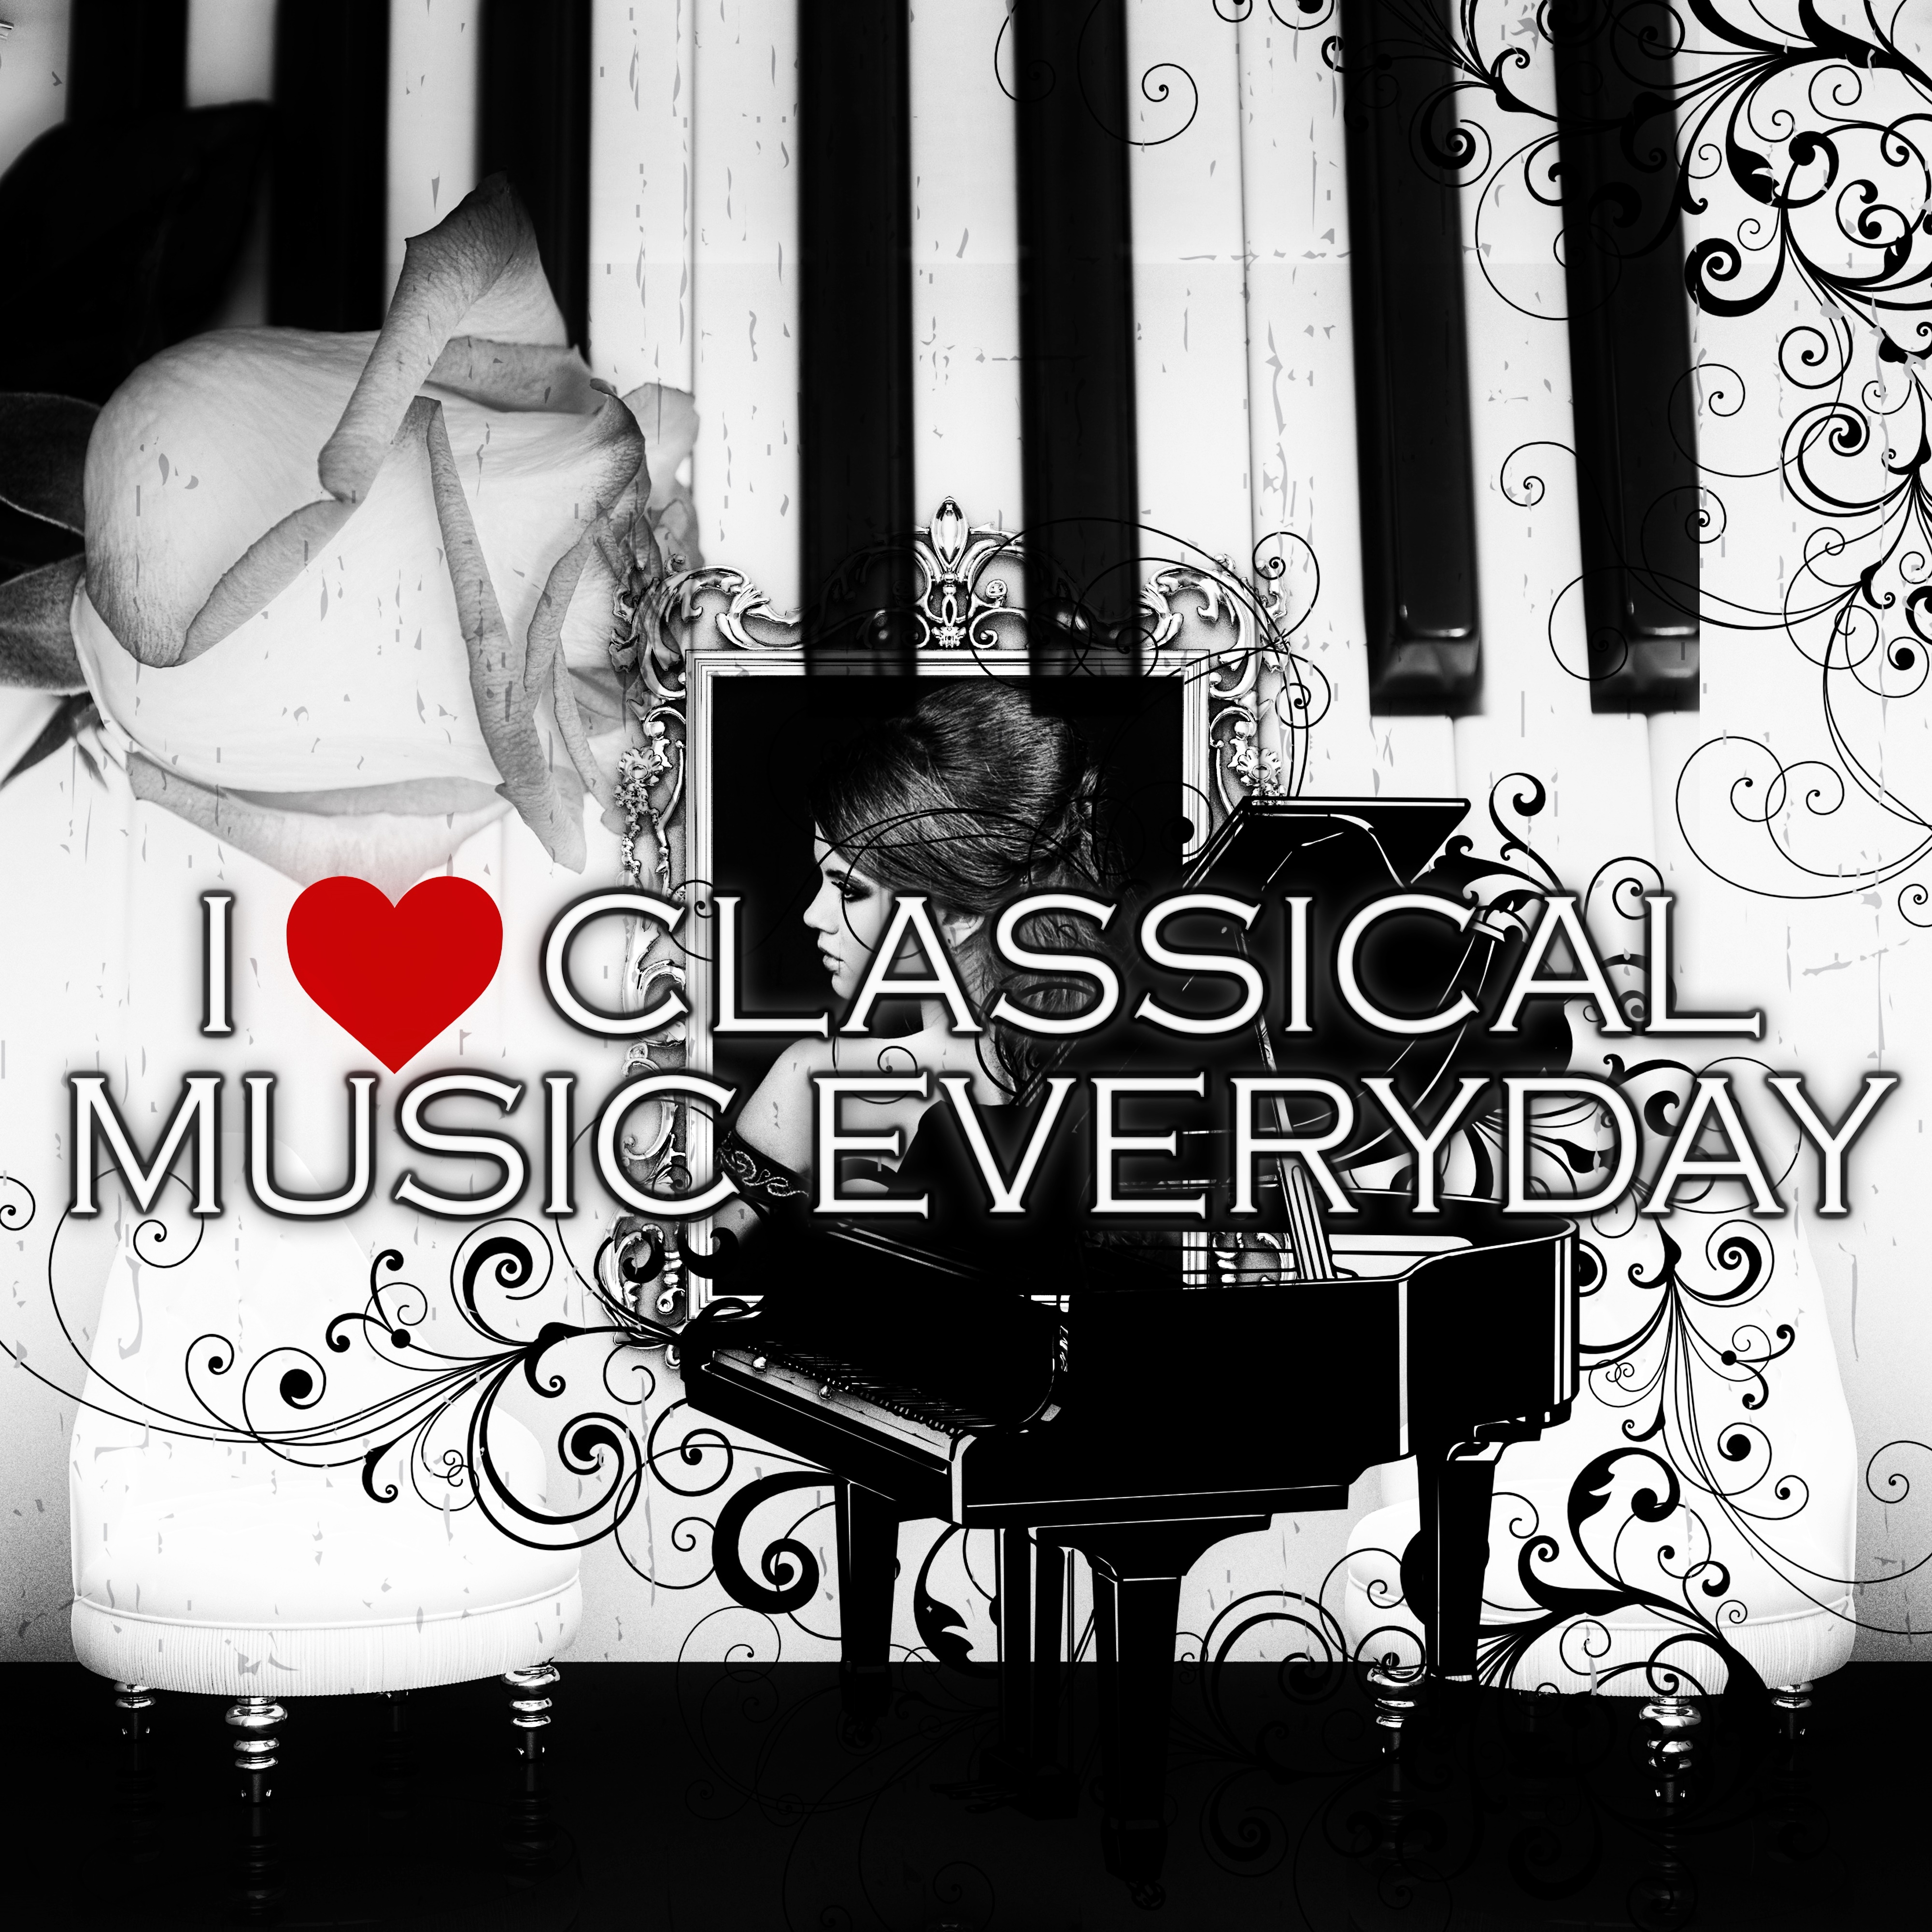 I Love Classical Music Everyday  Emotional Music for Everyone, Brilliant  Mood Music with Famous Composers, Daily Reflections, Golden Time with Classics, Greatest  Beautiful Moments